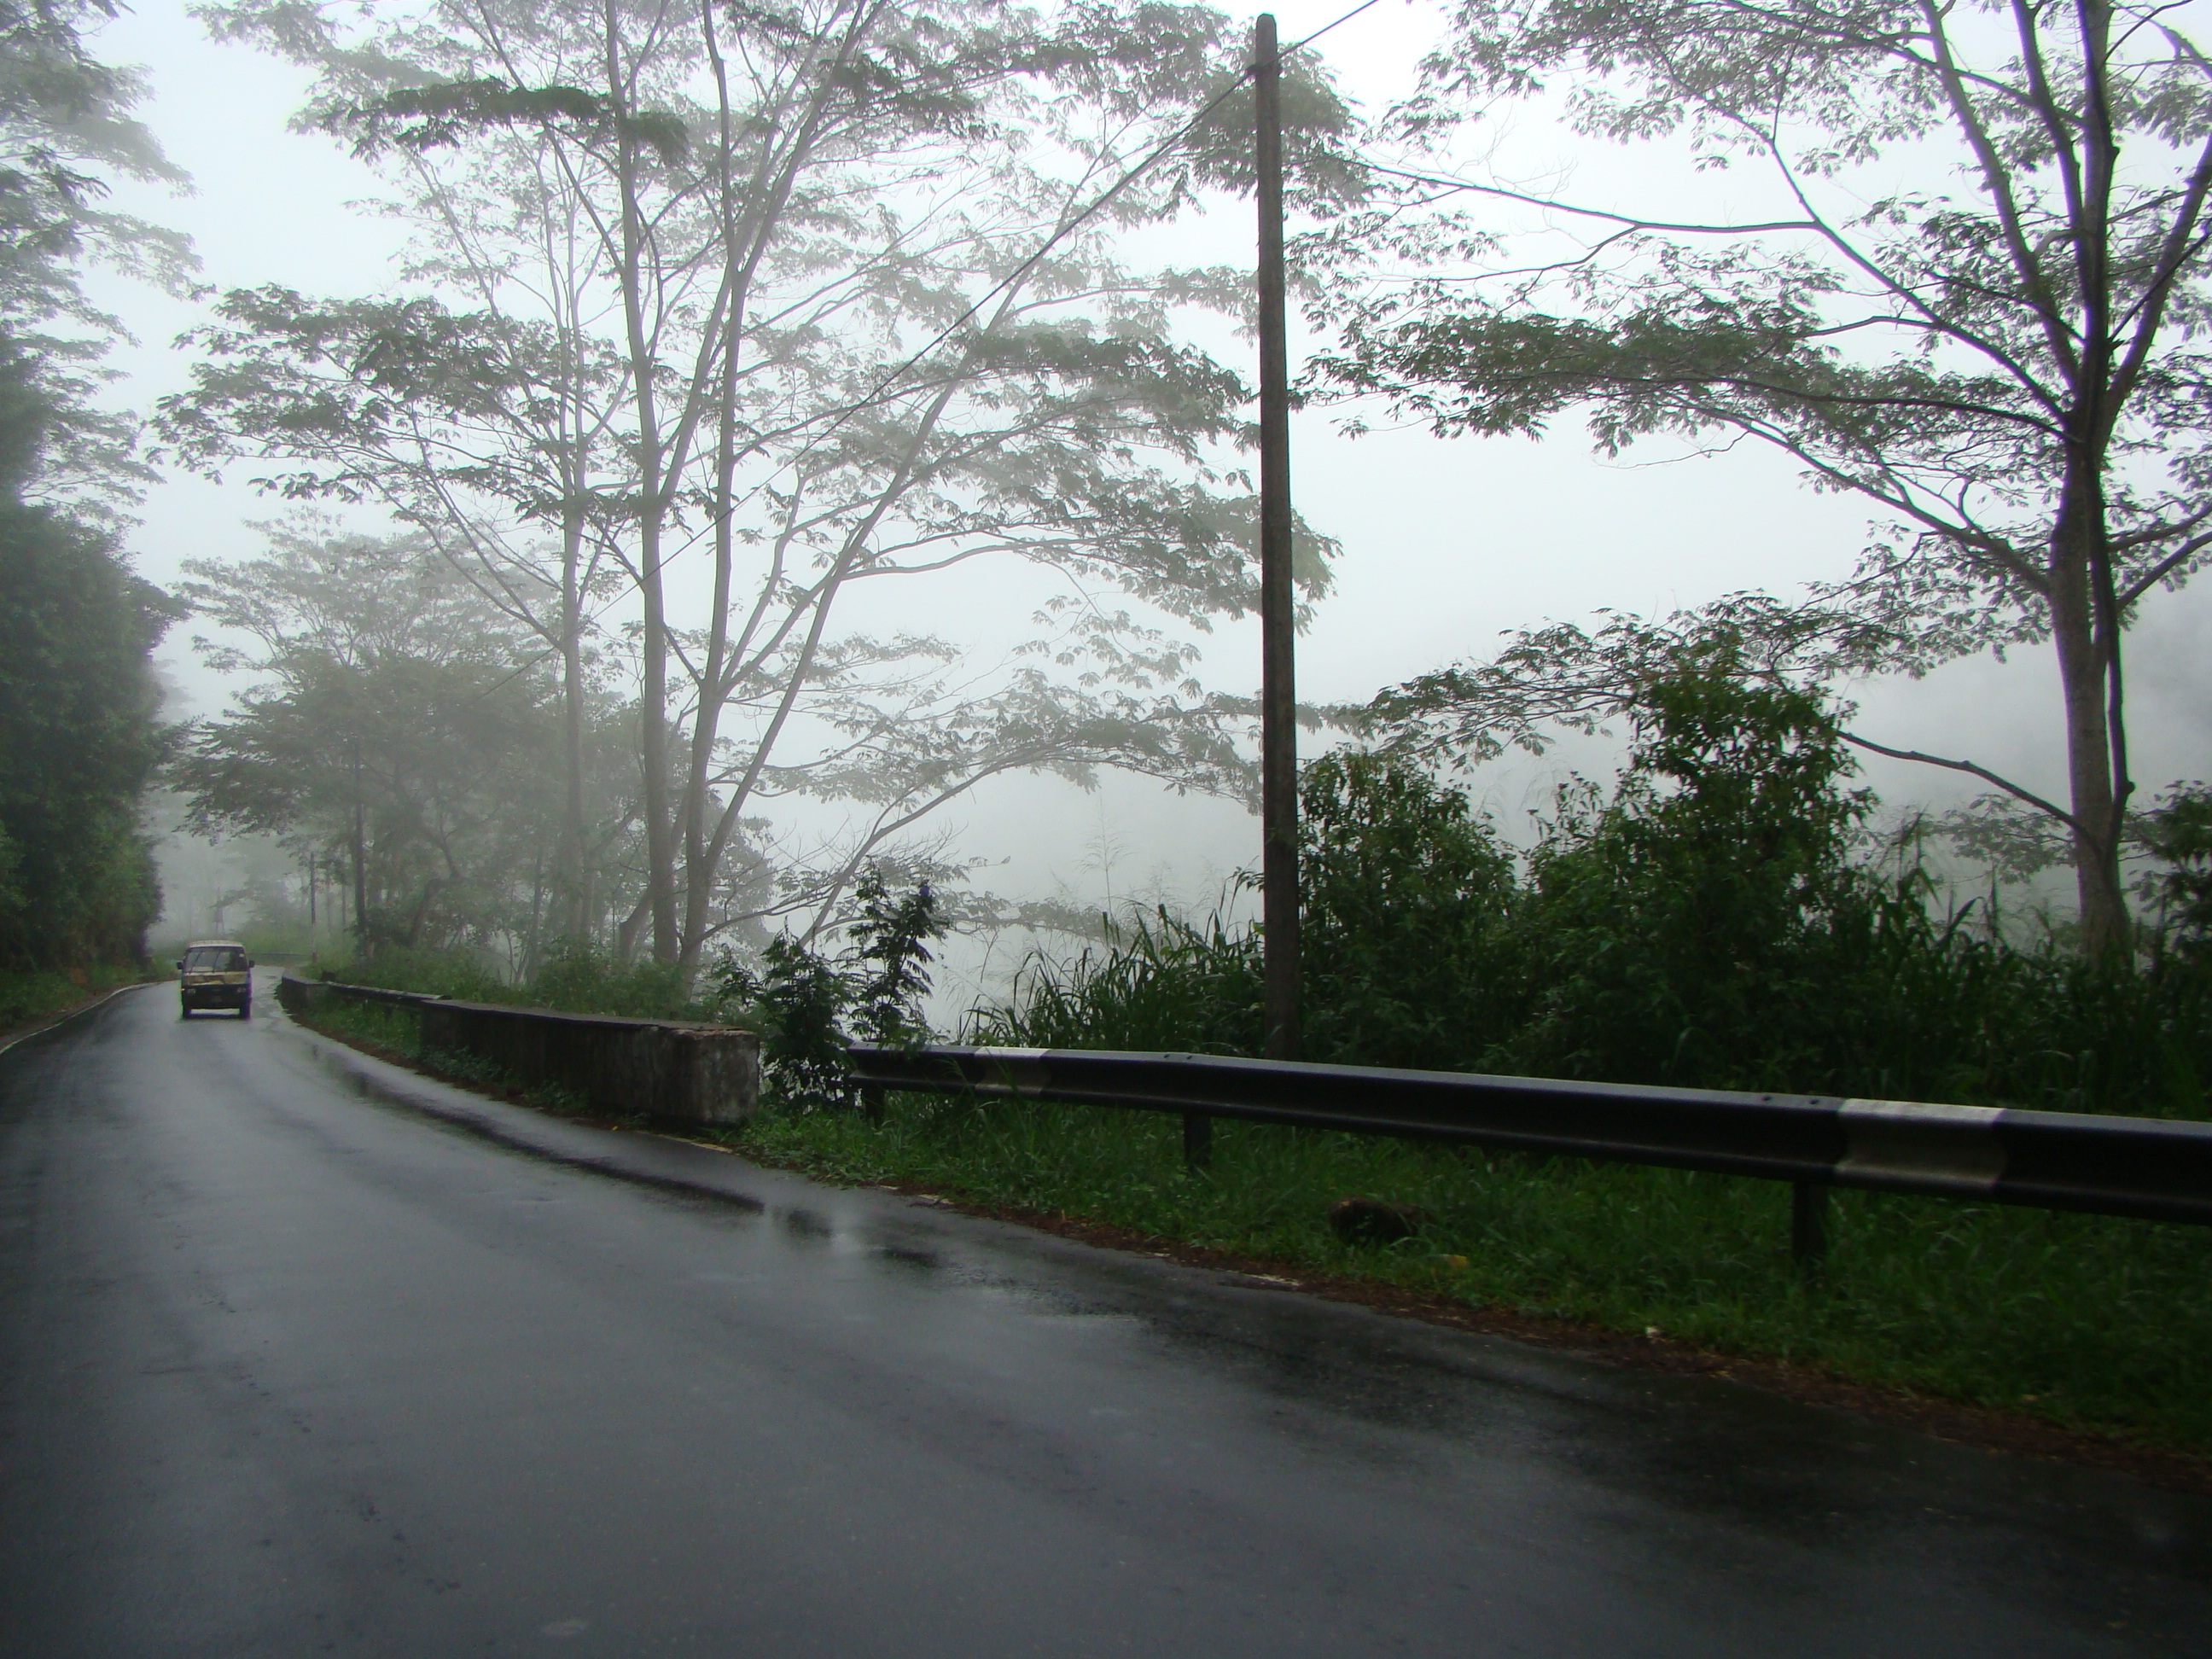 File:Road just after rain.JPG - Wikimedia Commons